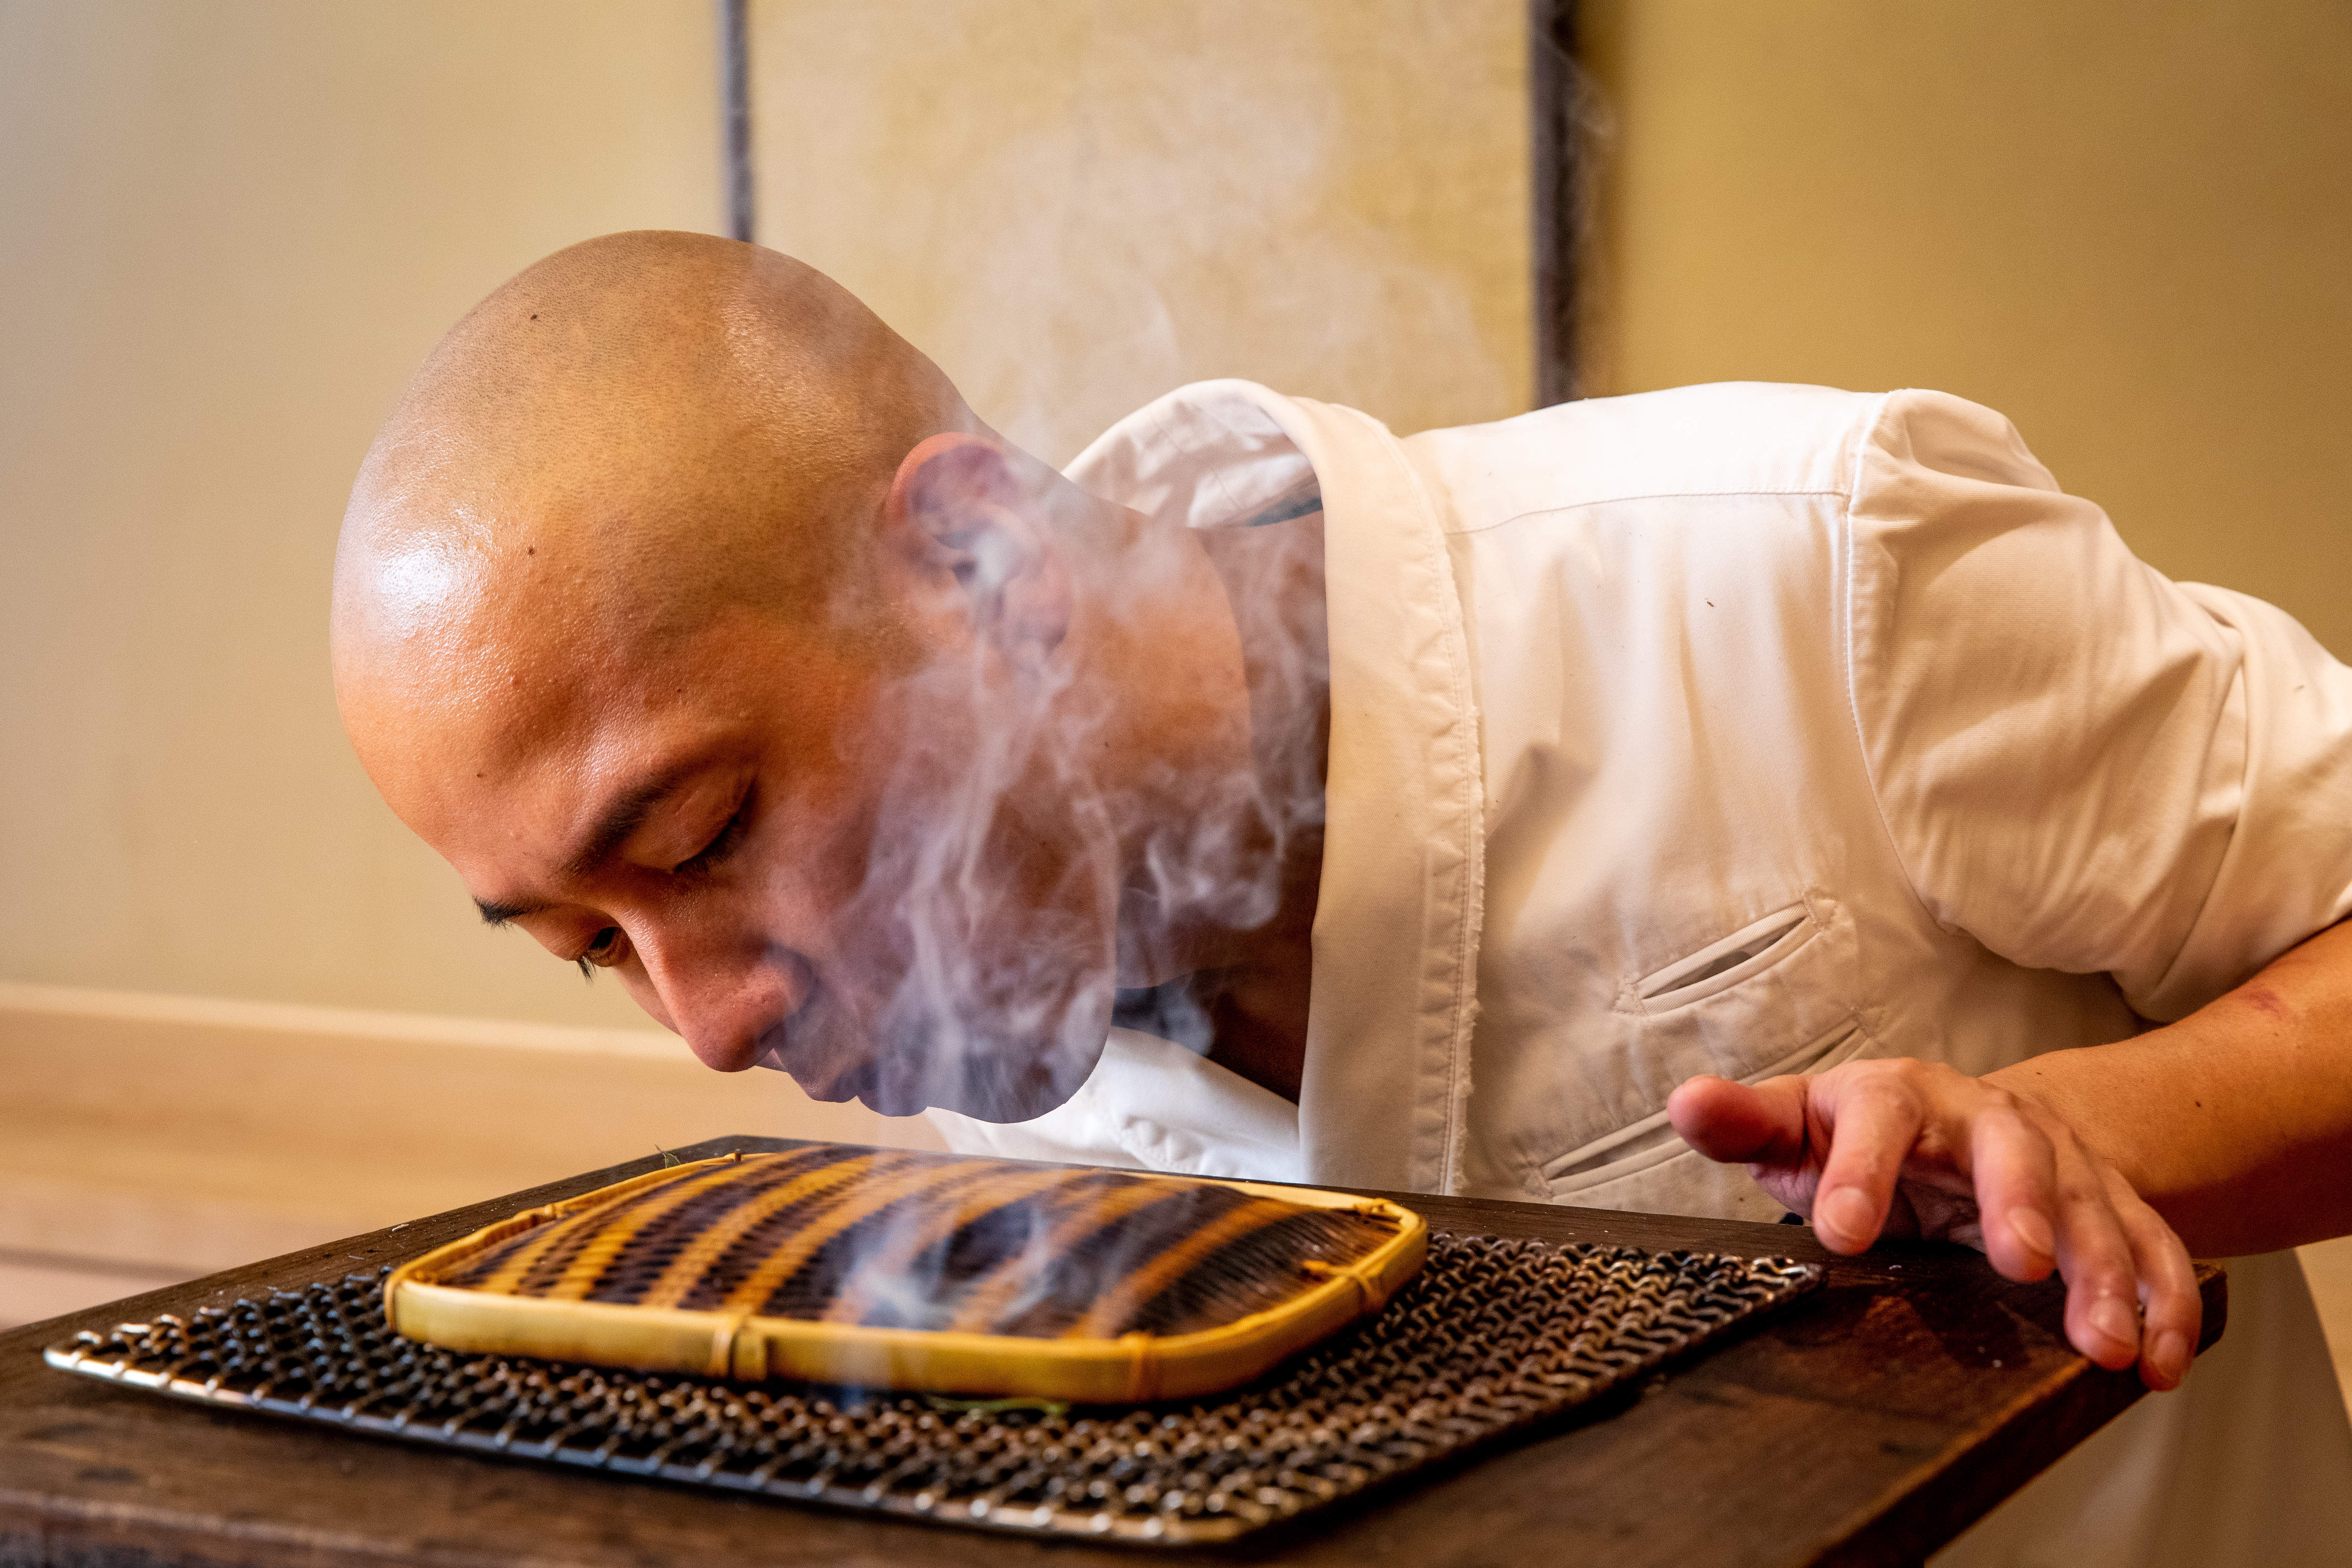 Noz chef Nozomu Abe blows over a portable grill he’s using to lightly smoke sea eel